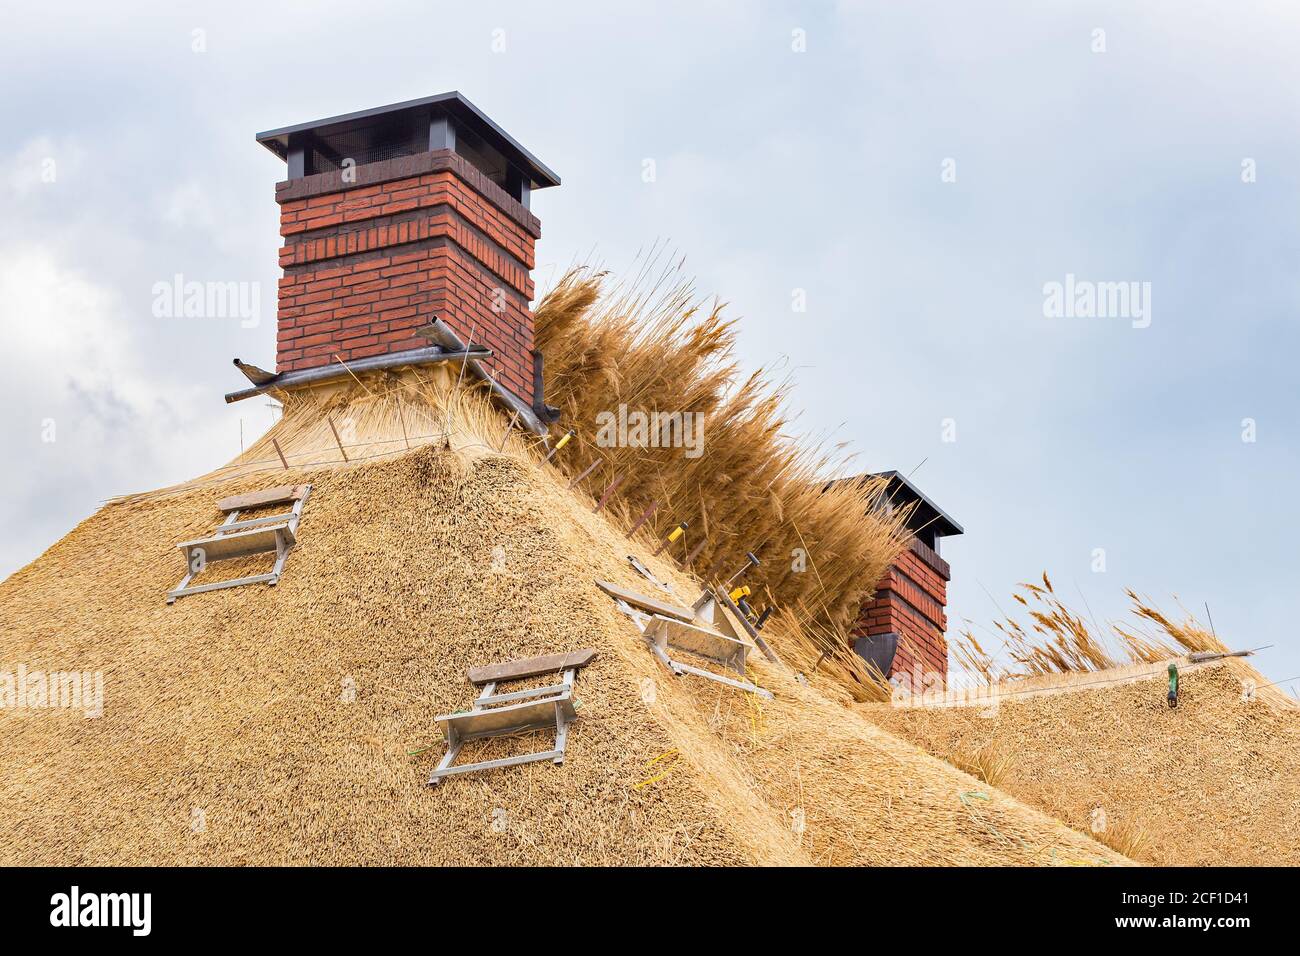 New thatched roof with two chimneys on dutch home Stock Photo